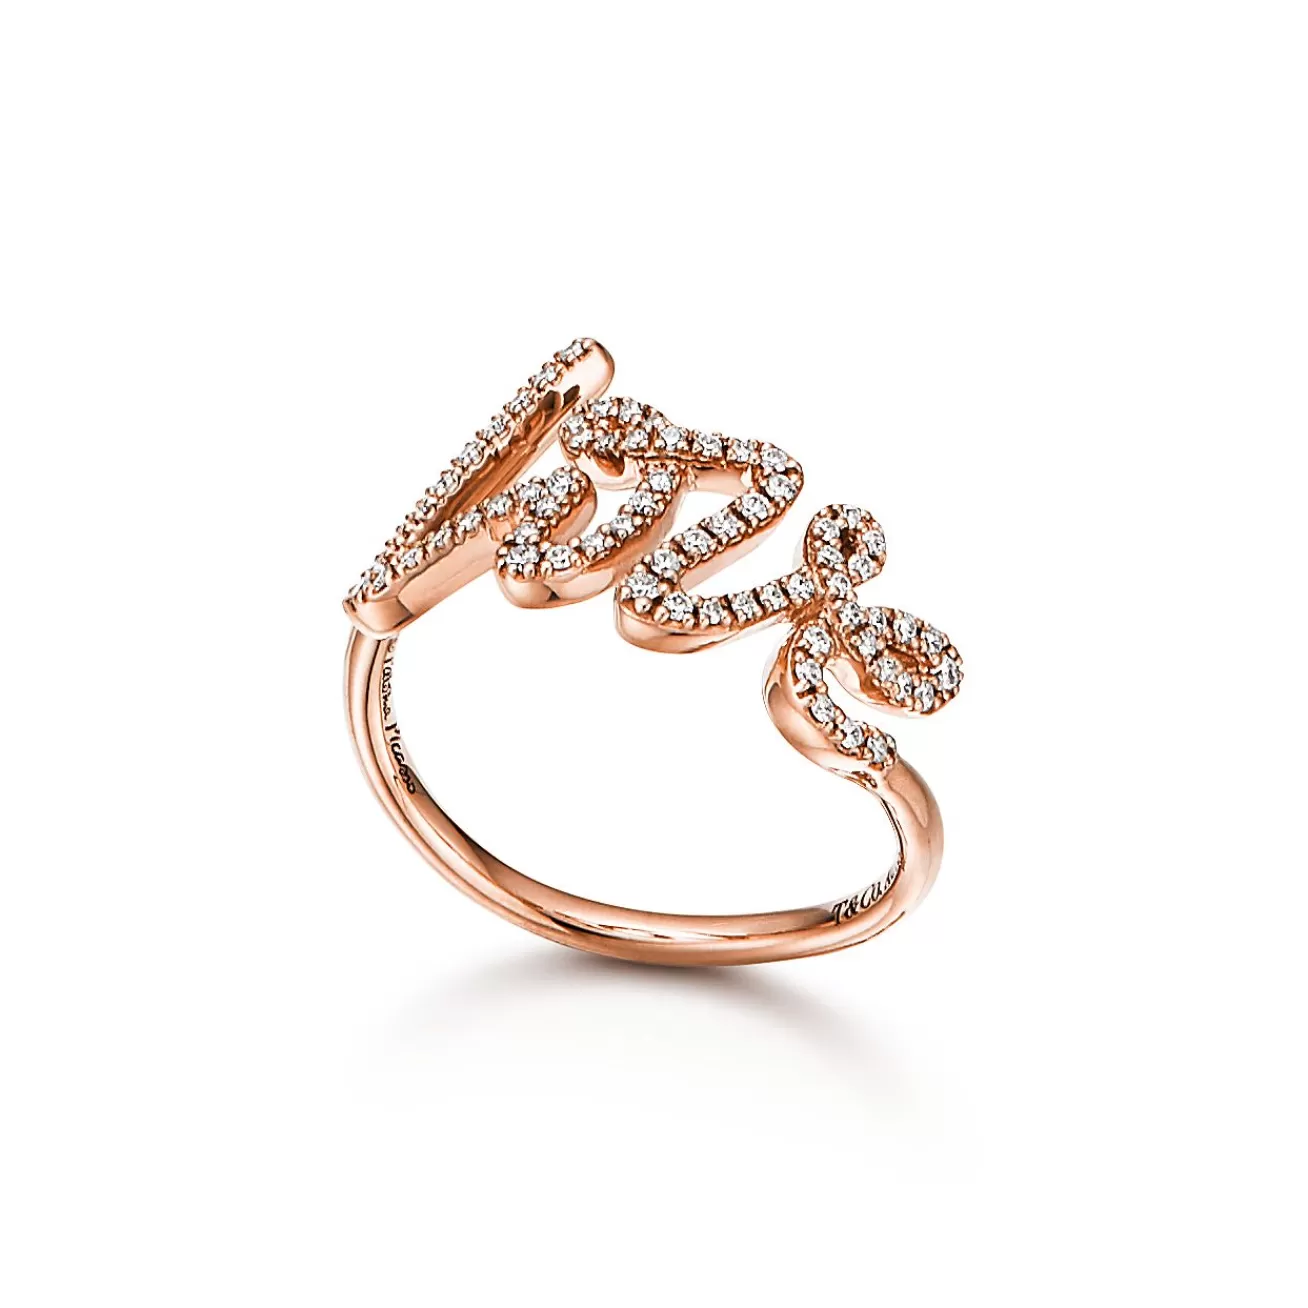 Tiffany & Co. Paloma's Graffiti Love Ring in Rose Gold with Diamonds, Small | ^ Rings | Rose Gold Jewelry